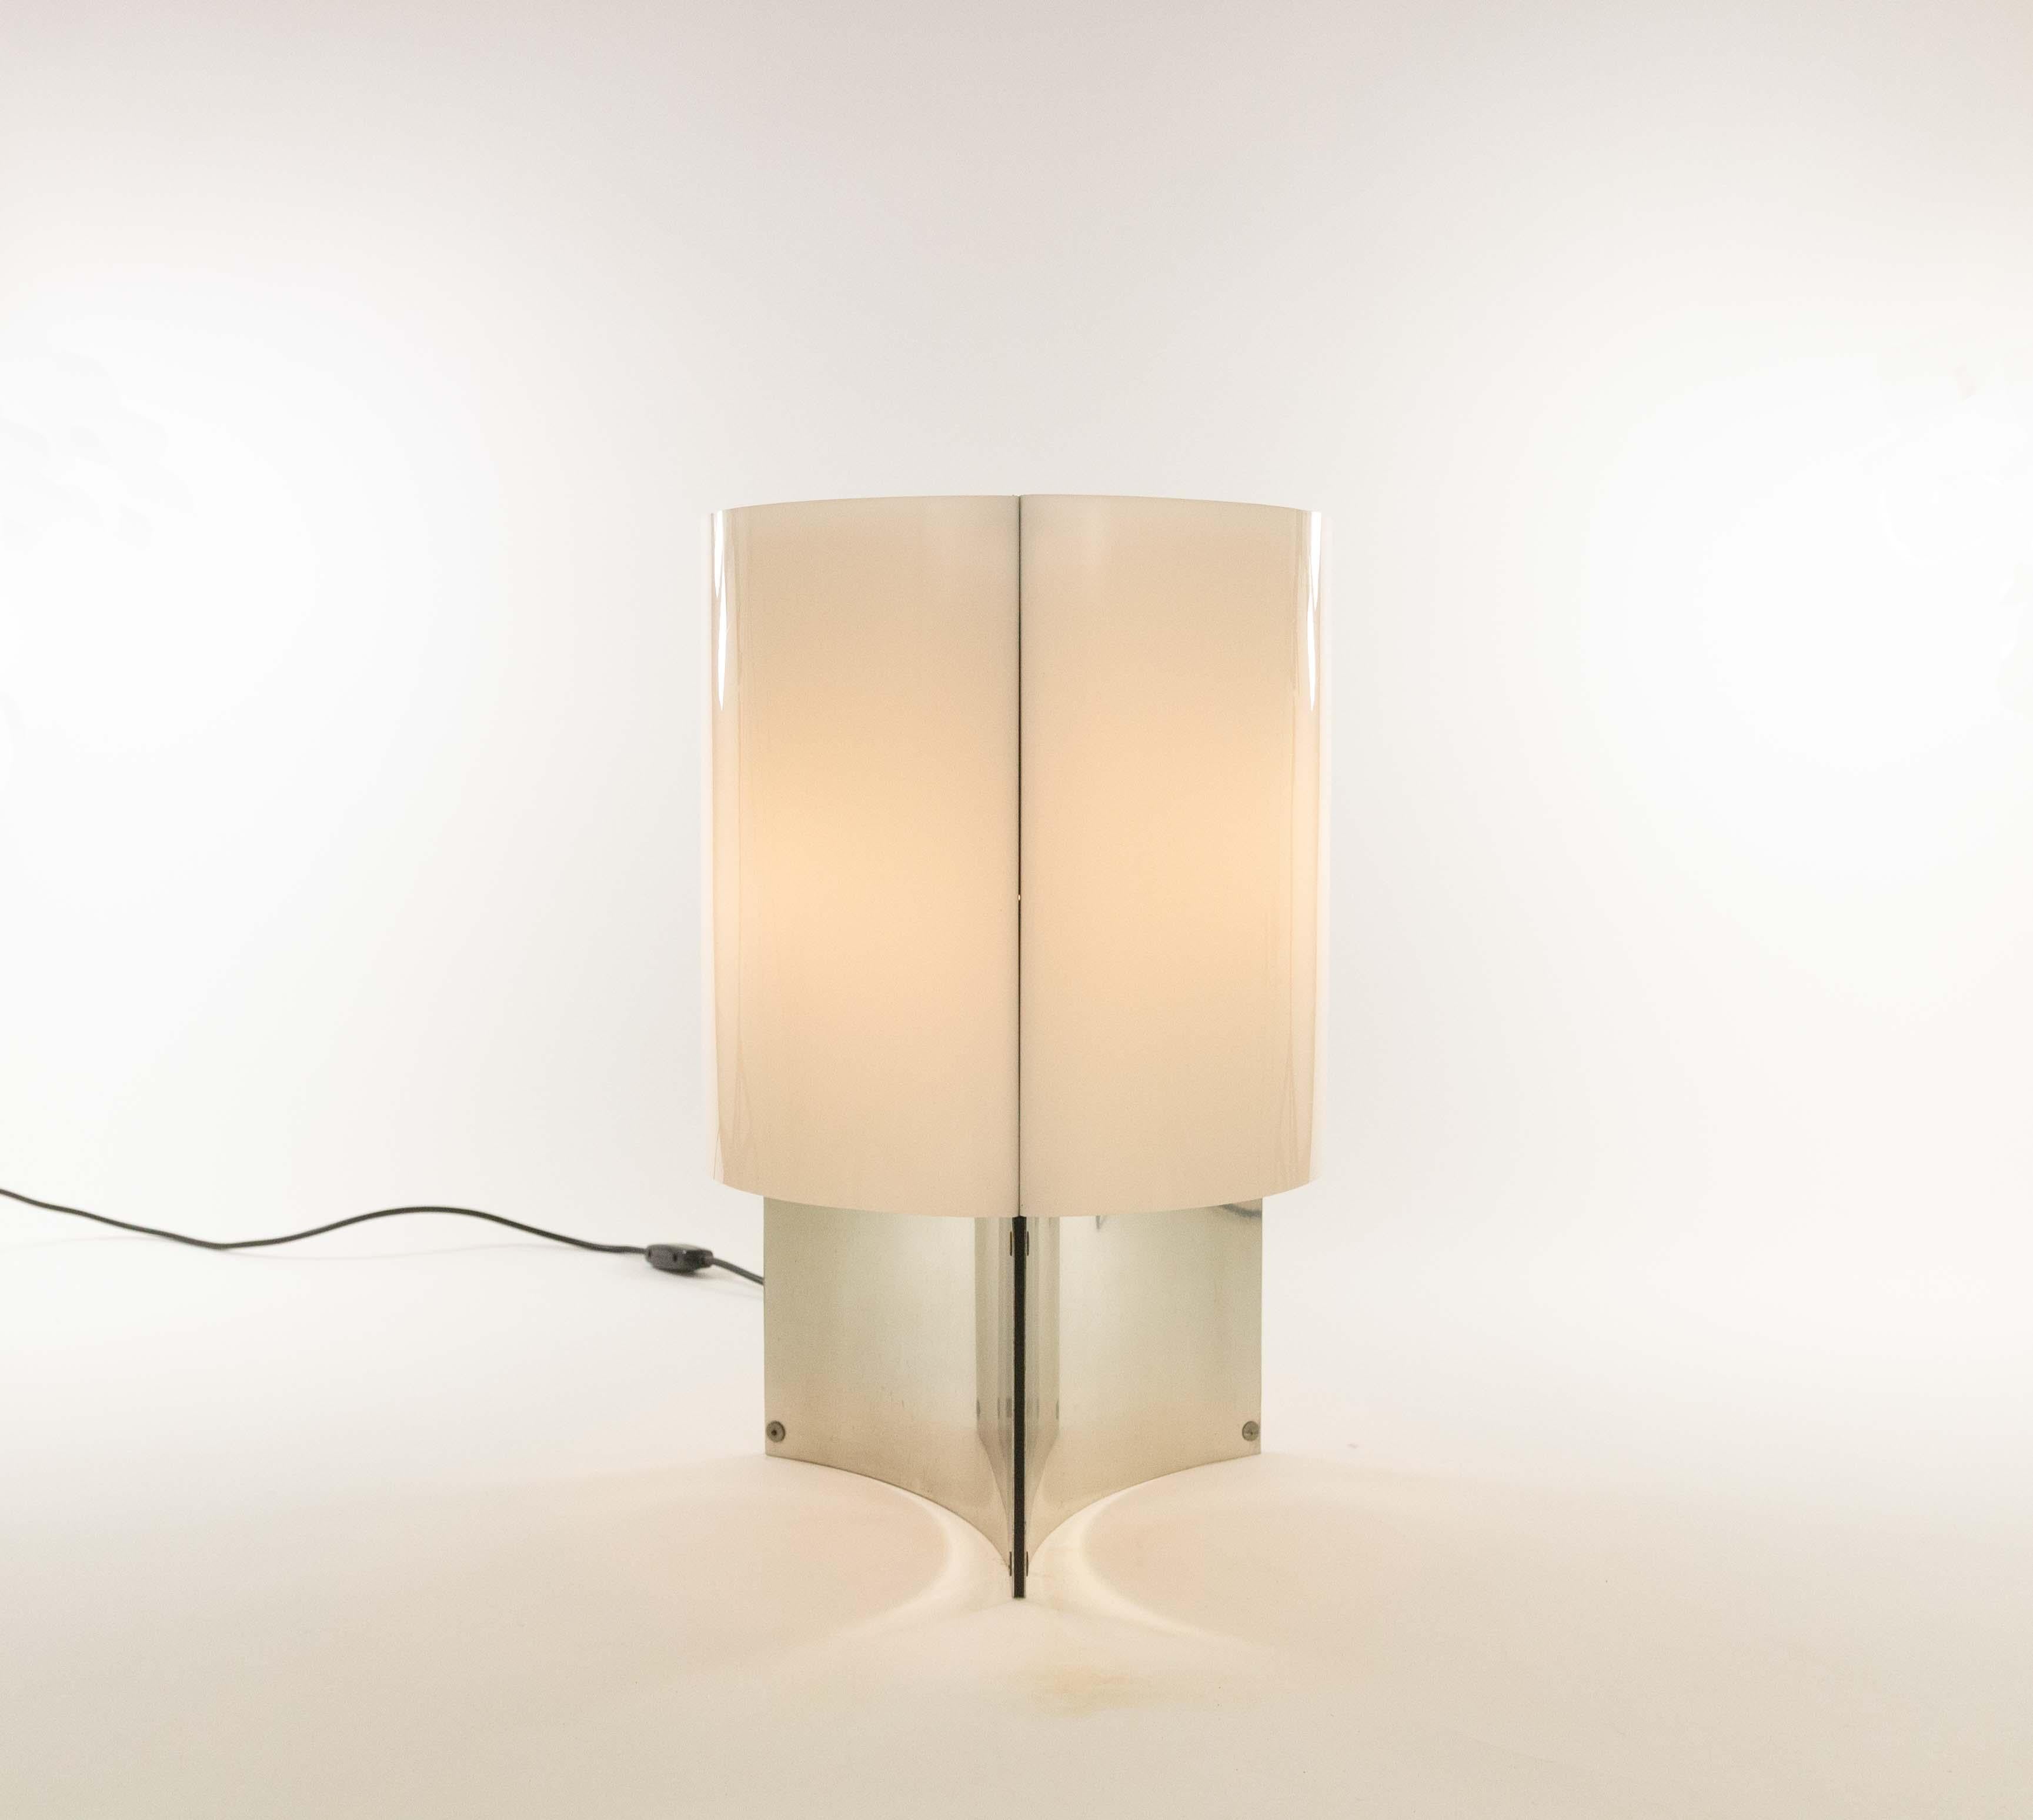 Mid-Century Modern Table Lamp Model No. 526/P by Massimo Vignelli for Arteluce, 1965